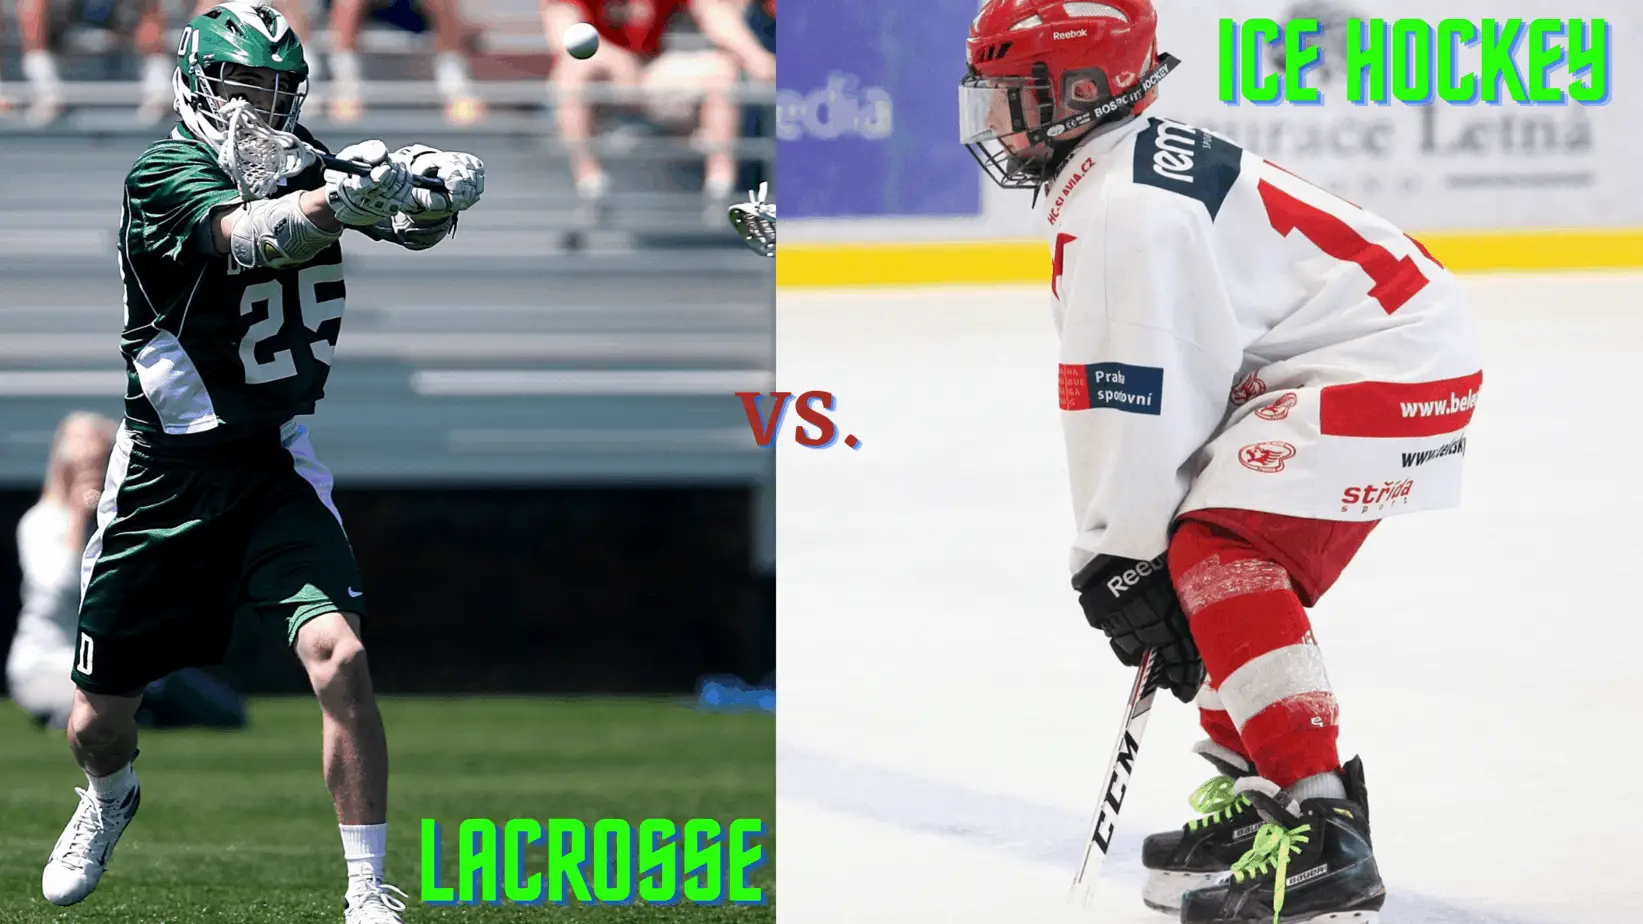 Ice Hockey or Lacrosse, Which is Right for You? (Ice Hockey Vs Lacrosse)